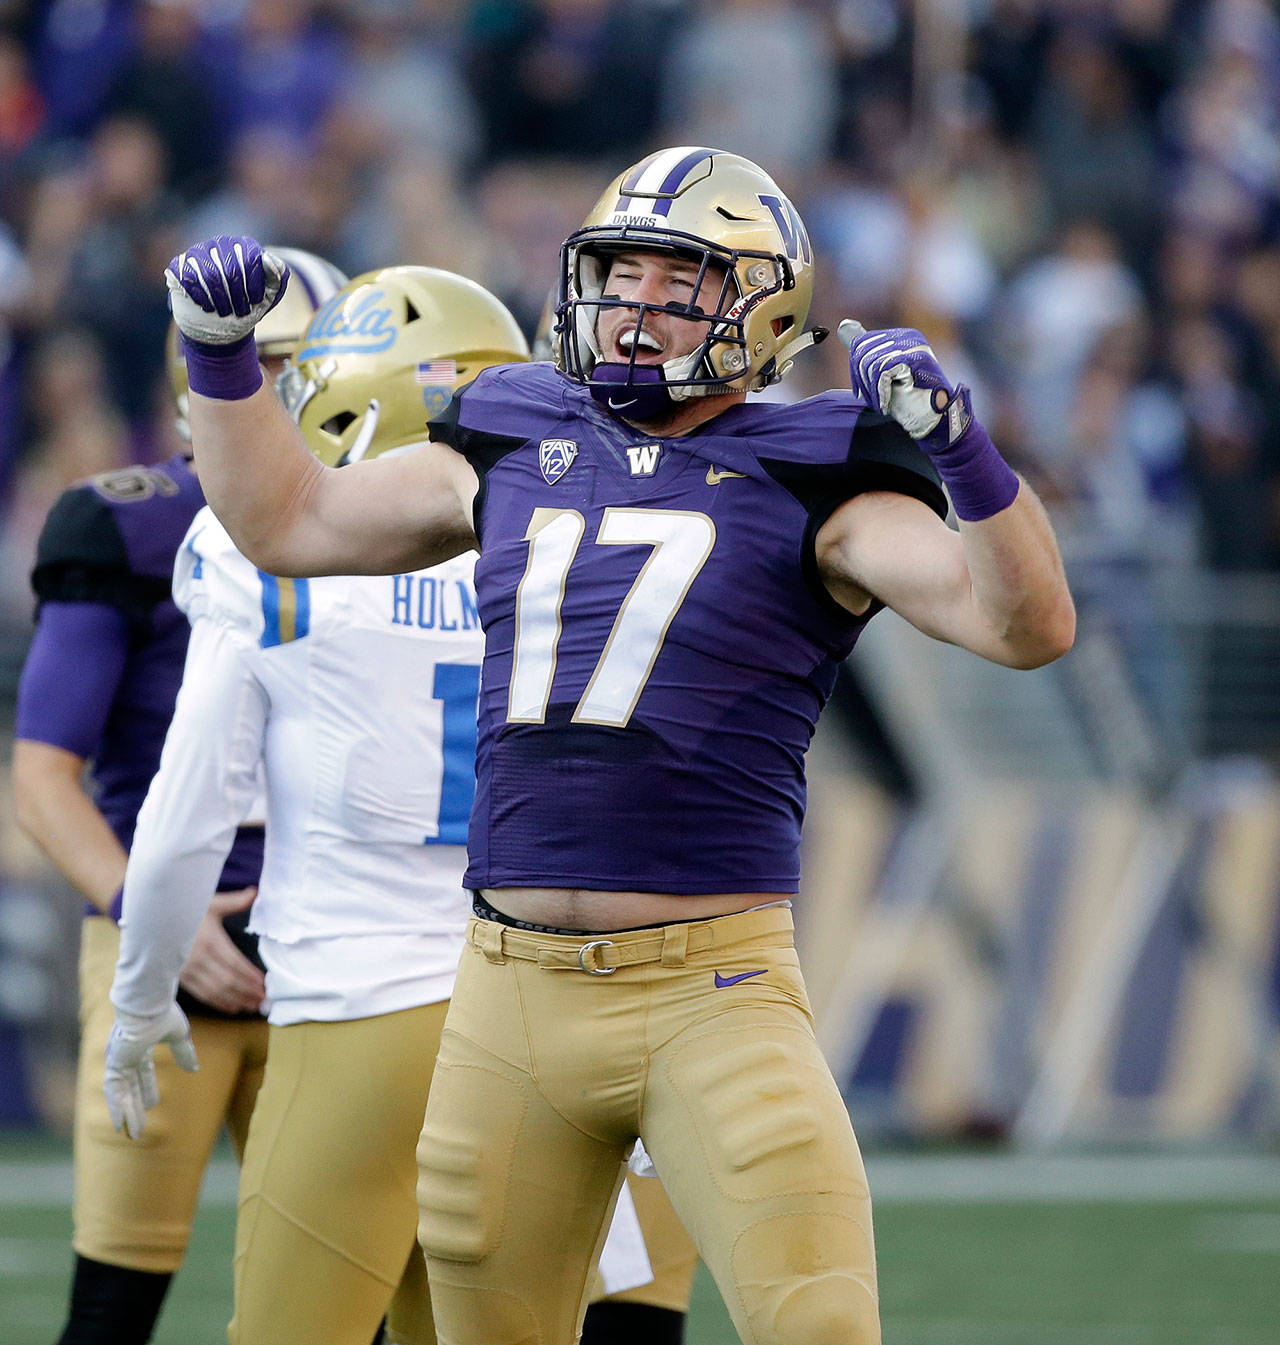 Washington’s Tevis Bartlett reacts to an extra point in a game against UCLA on Oct. 28, 2017, in Seattle. (Elaine Thompson / Associated Press)